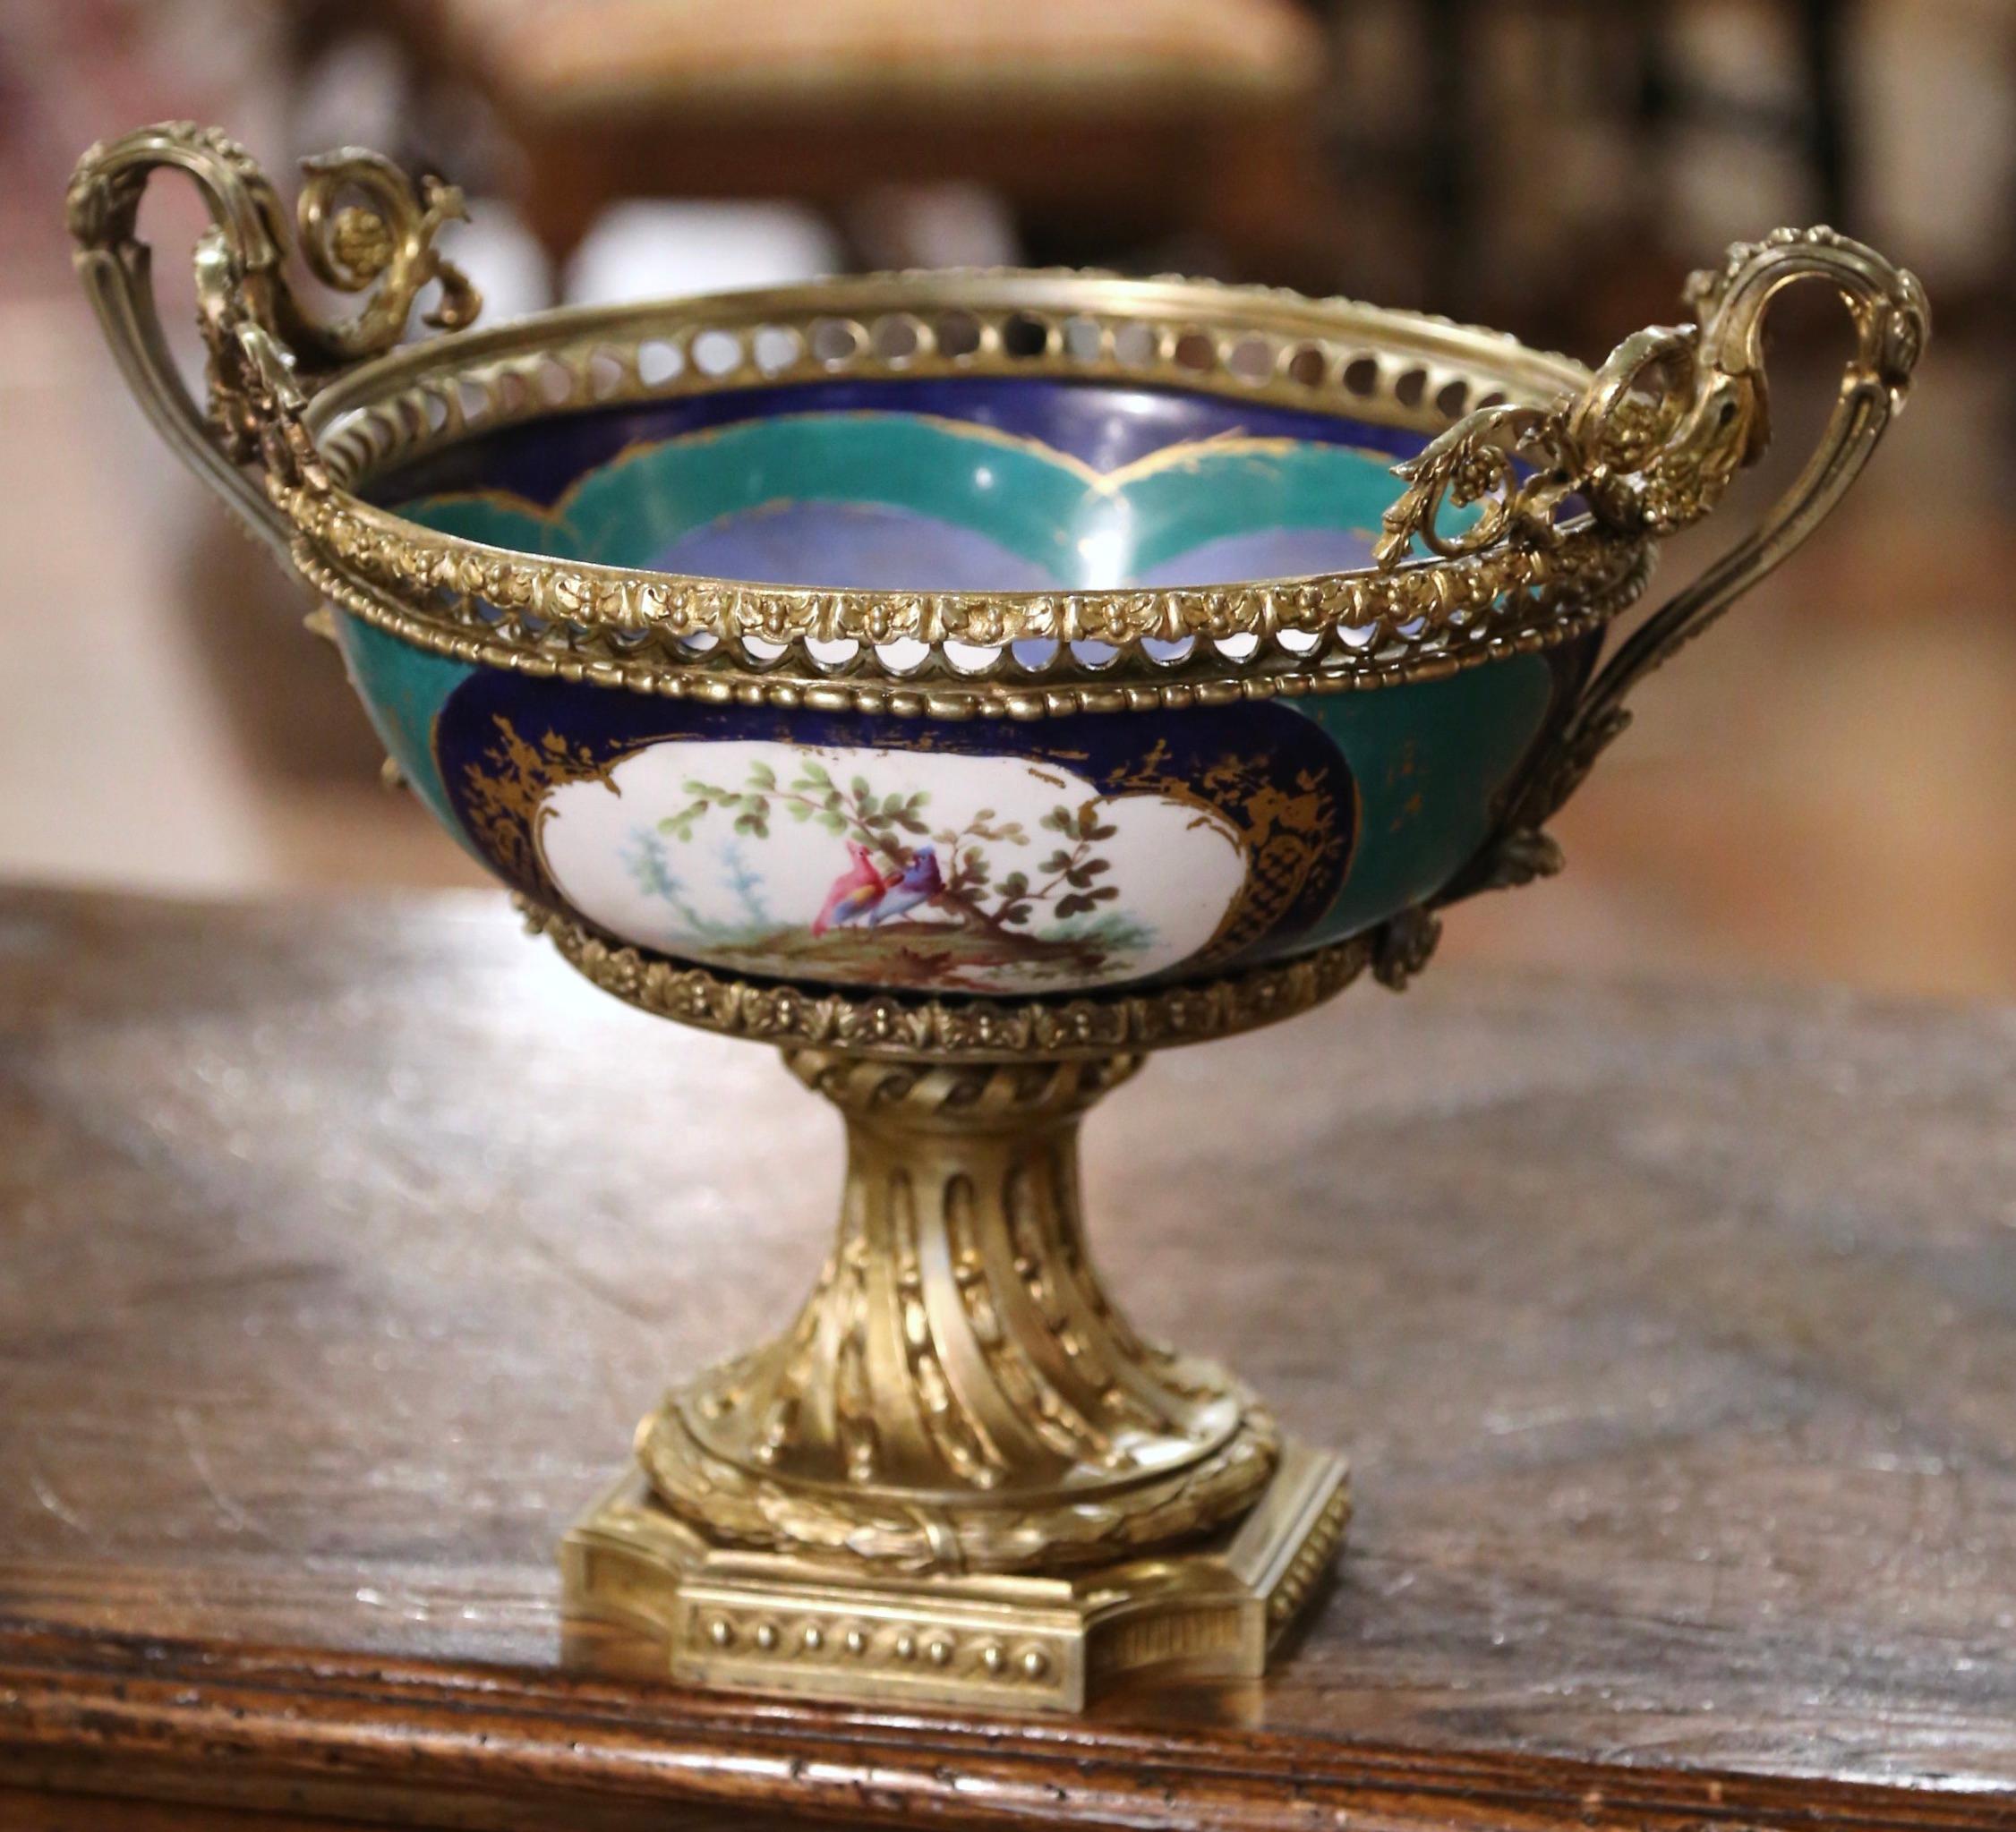 Attributed to the Manufacture de Sevres this elegant, antique jardinière was crafted in Paris, France, circa 1860. Standing on a twisted bronze dore base, the colorful centerpiece is dressed with a pierced bronze gallery rim and elegant intricate